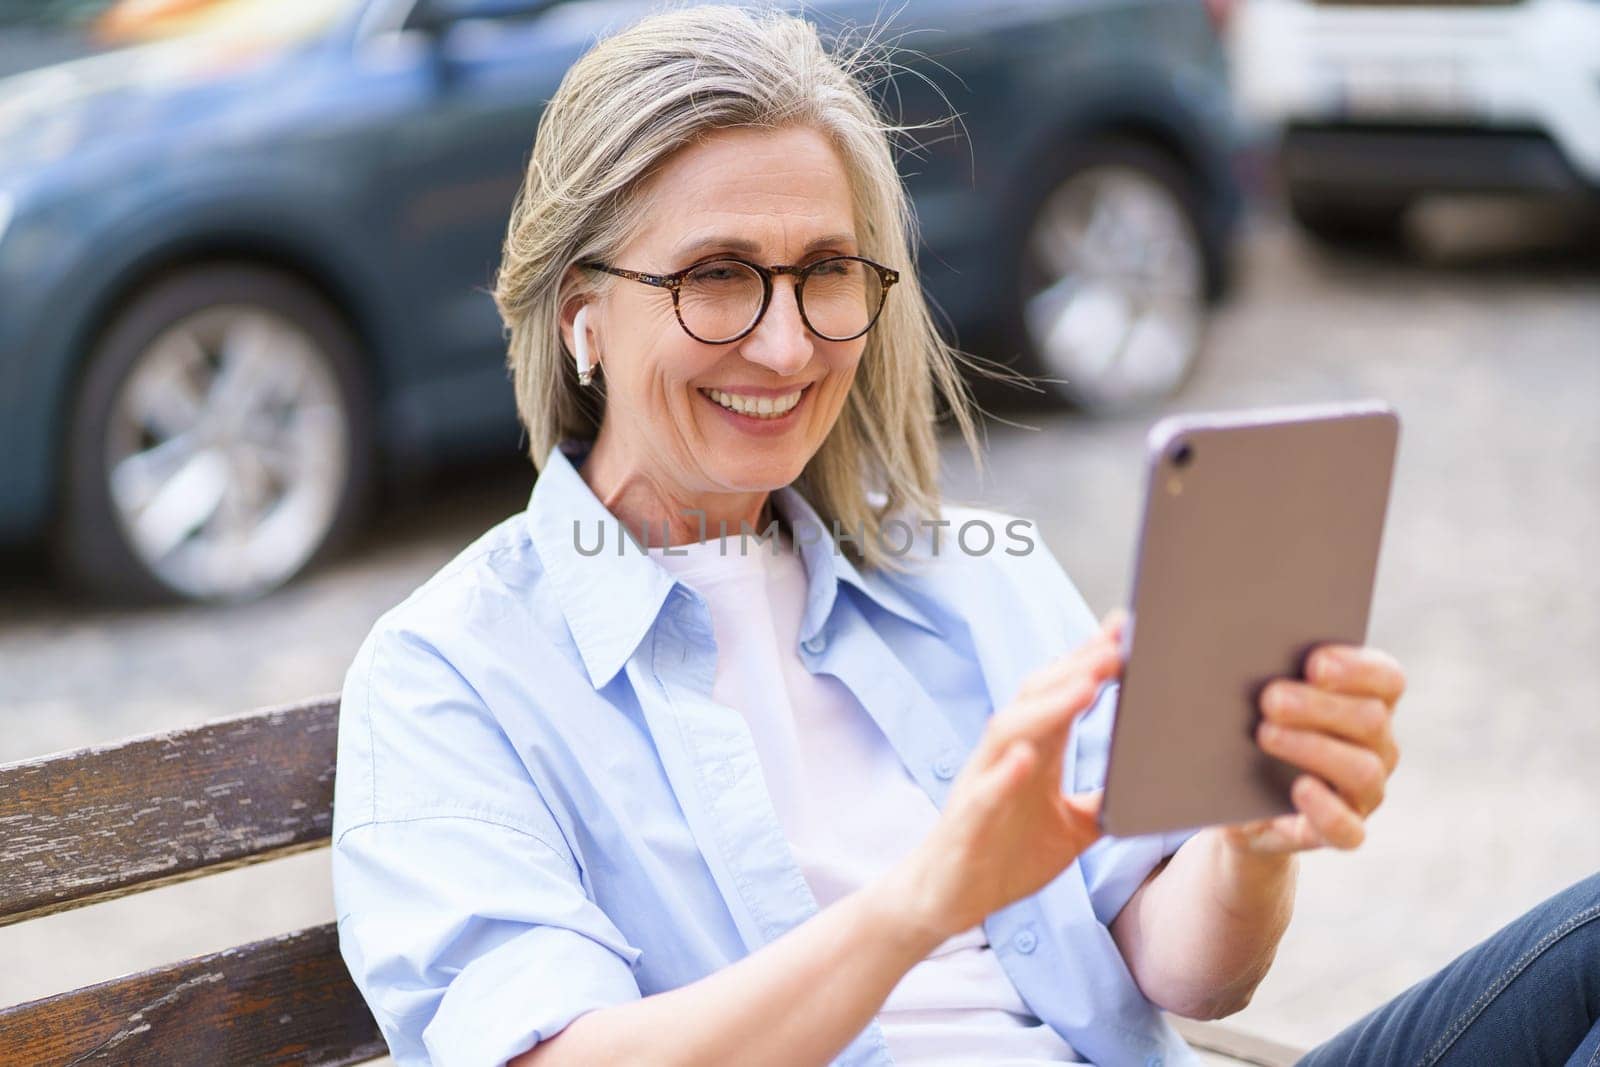 Happy and confident mature woman smiles while holding tablet PC and taking call in busy city. The urban scene and modern technology convey sense of connectivity and convenience, while the woman's positive energy and independent spirit inspire success and vibrancy. High quality photo